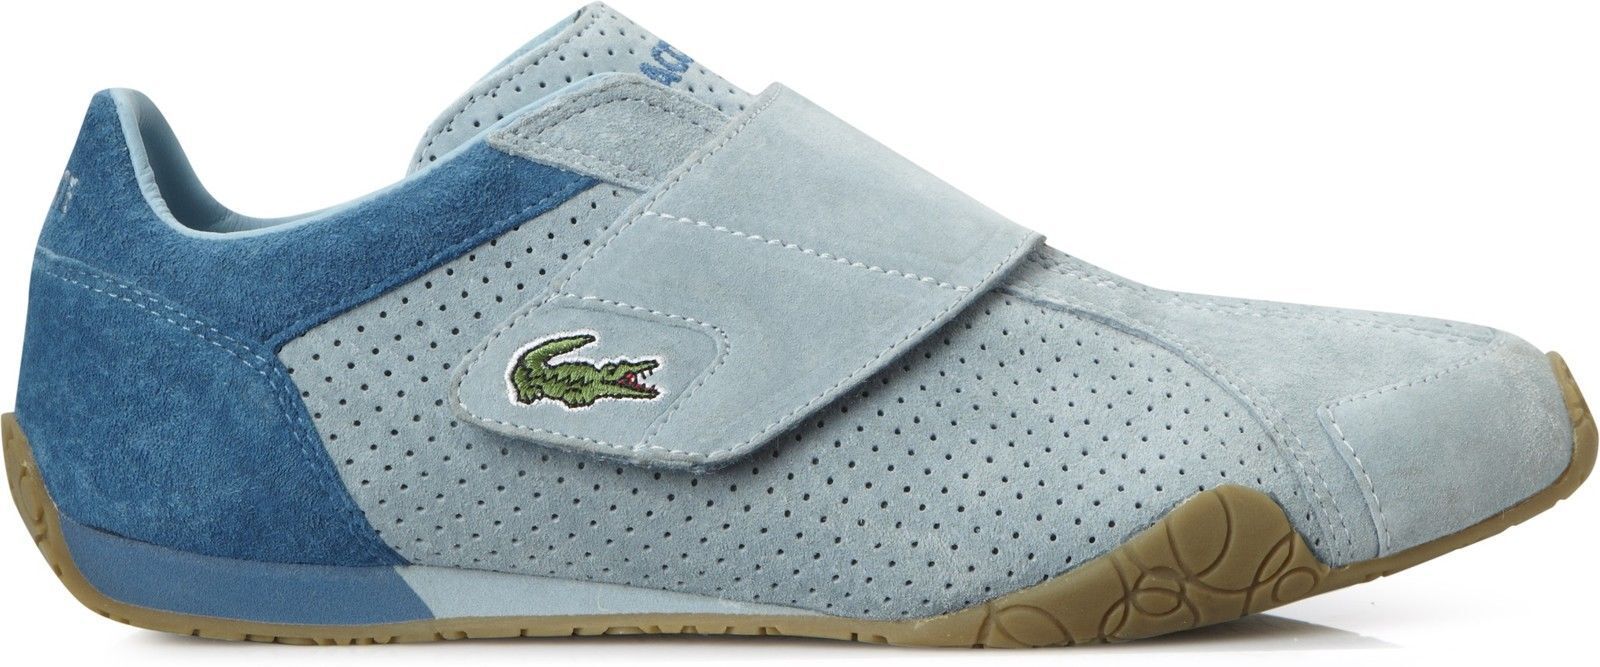 lacoste sneakers india